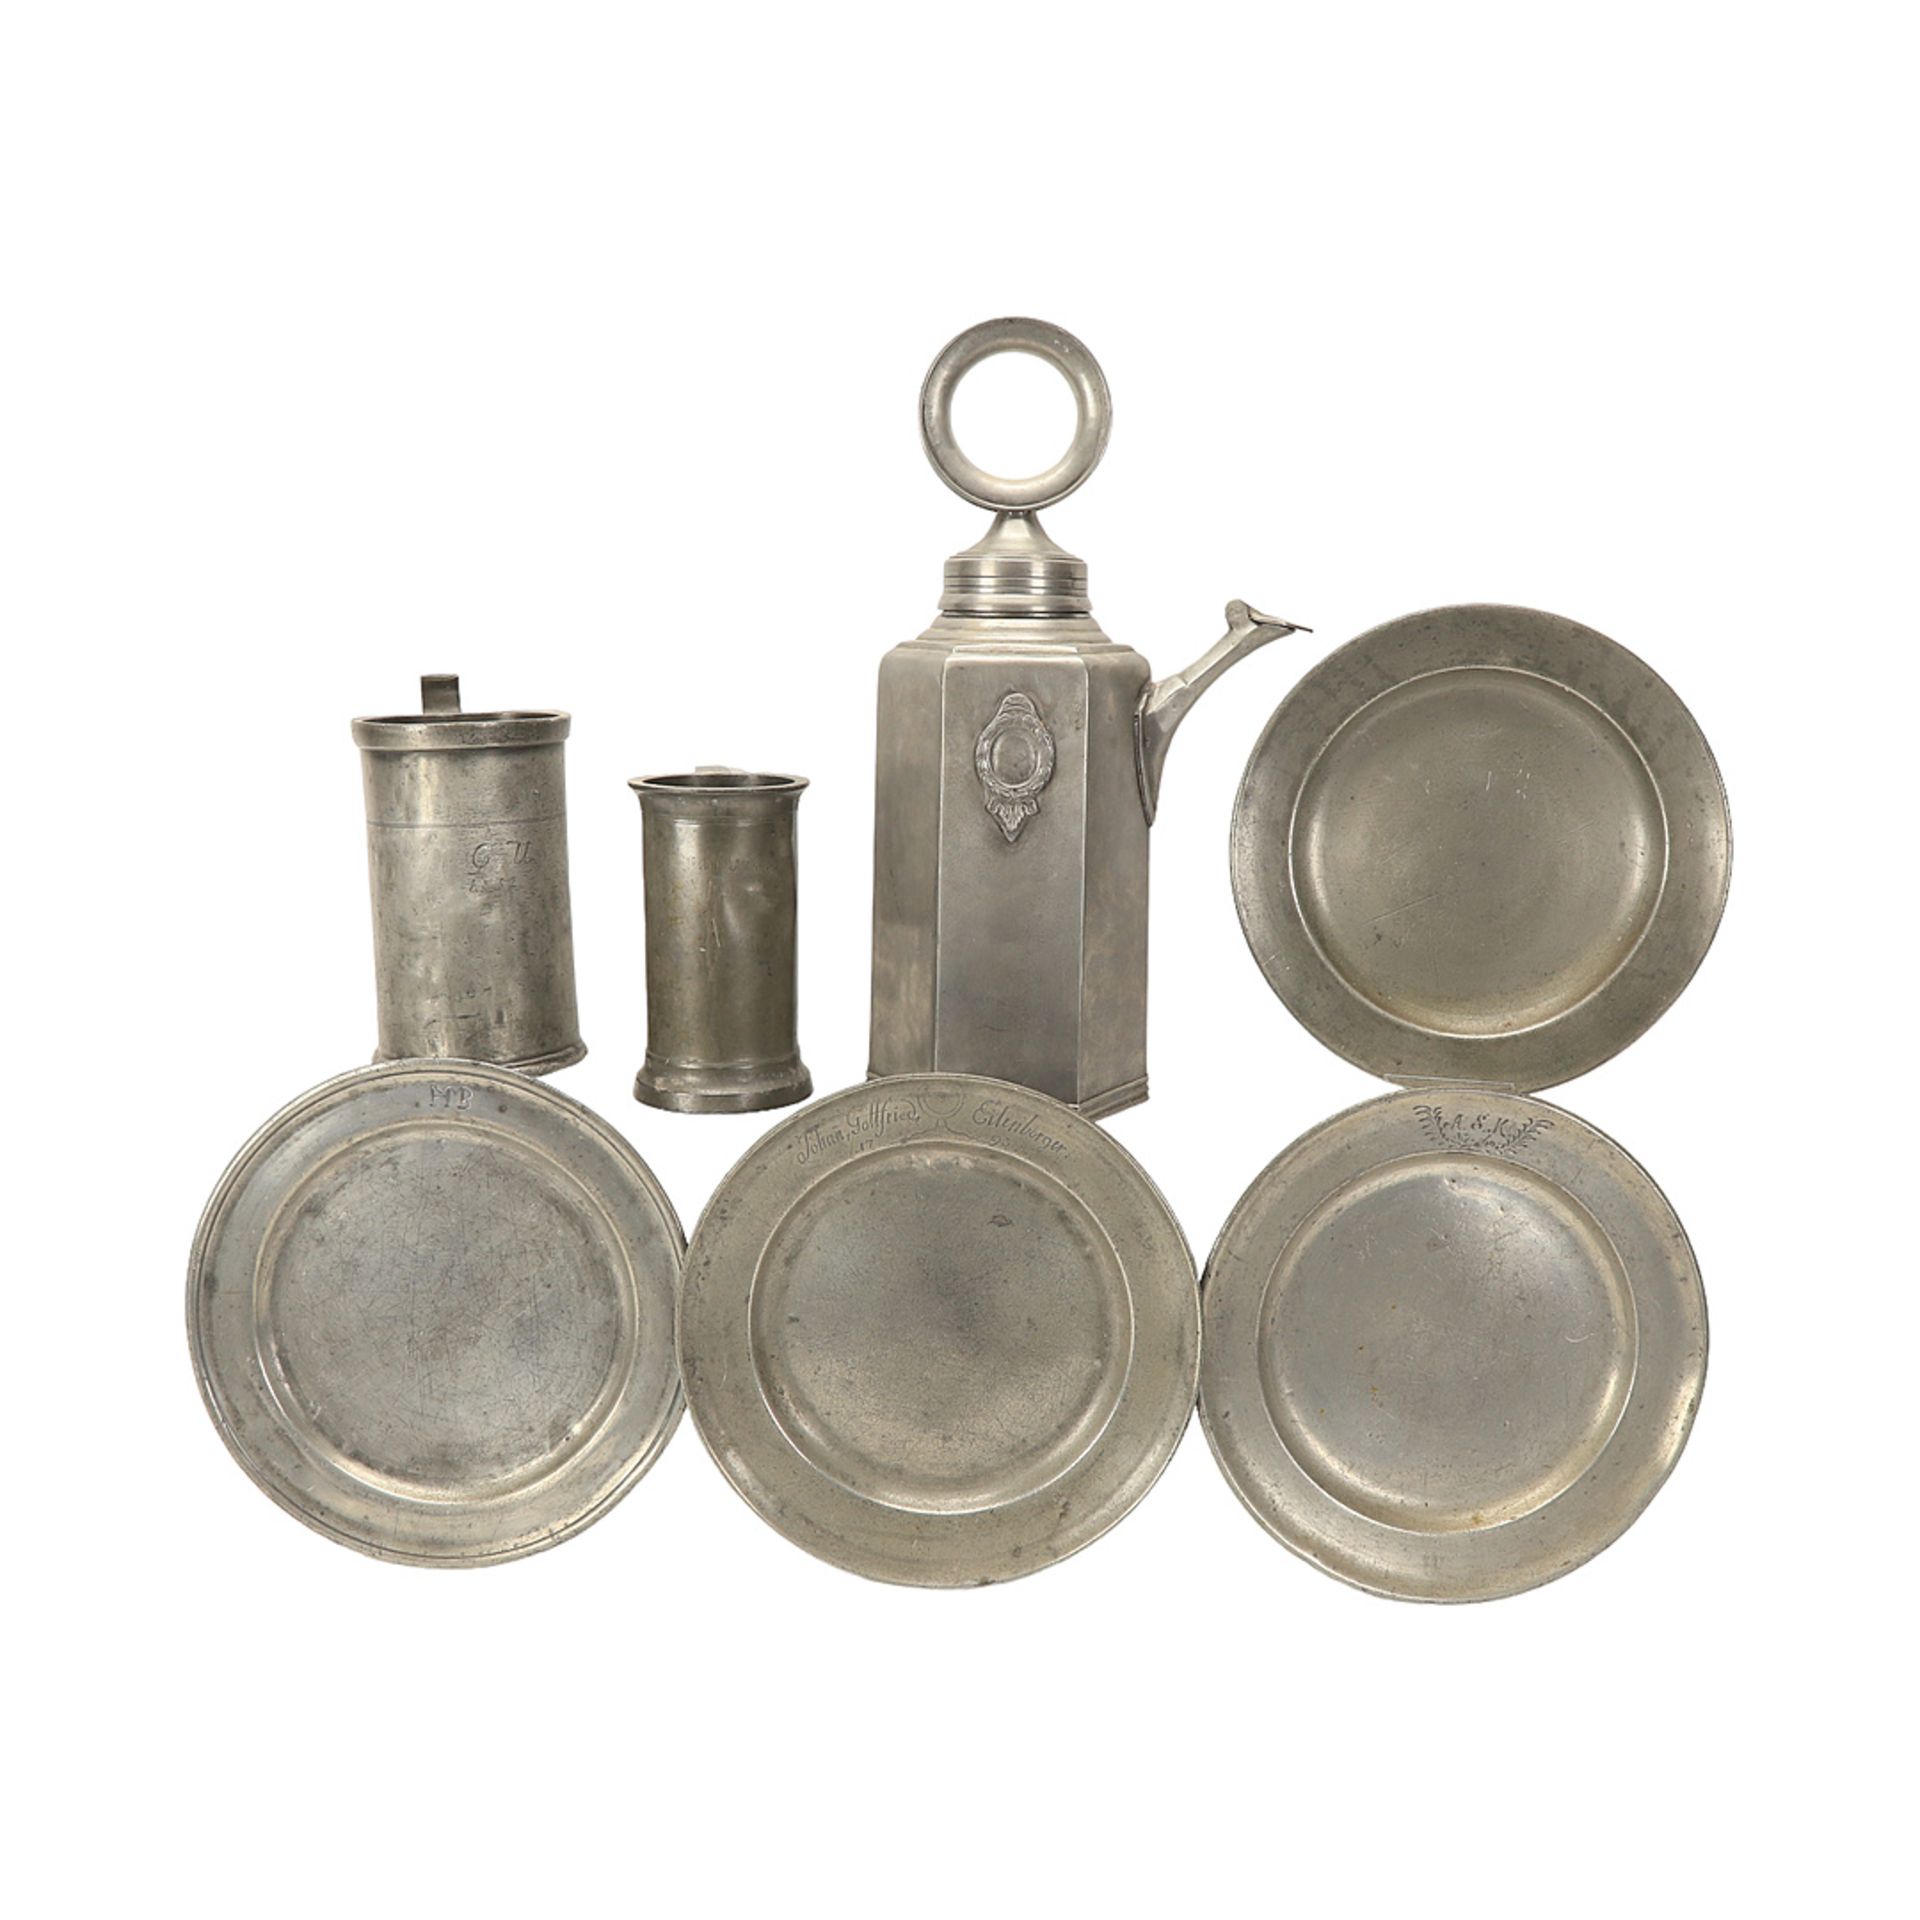 Small collection of pewter, Germany / France, 18th/19th century